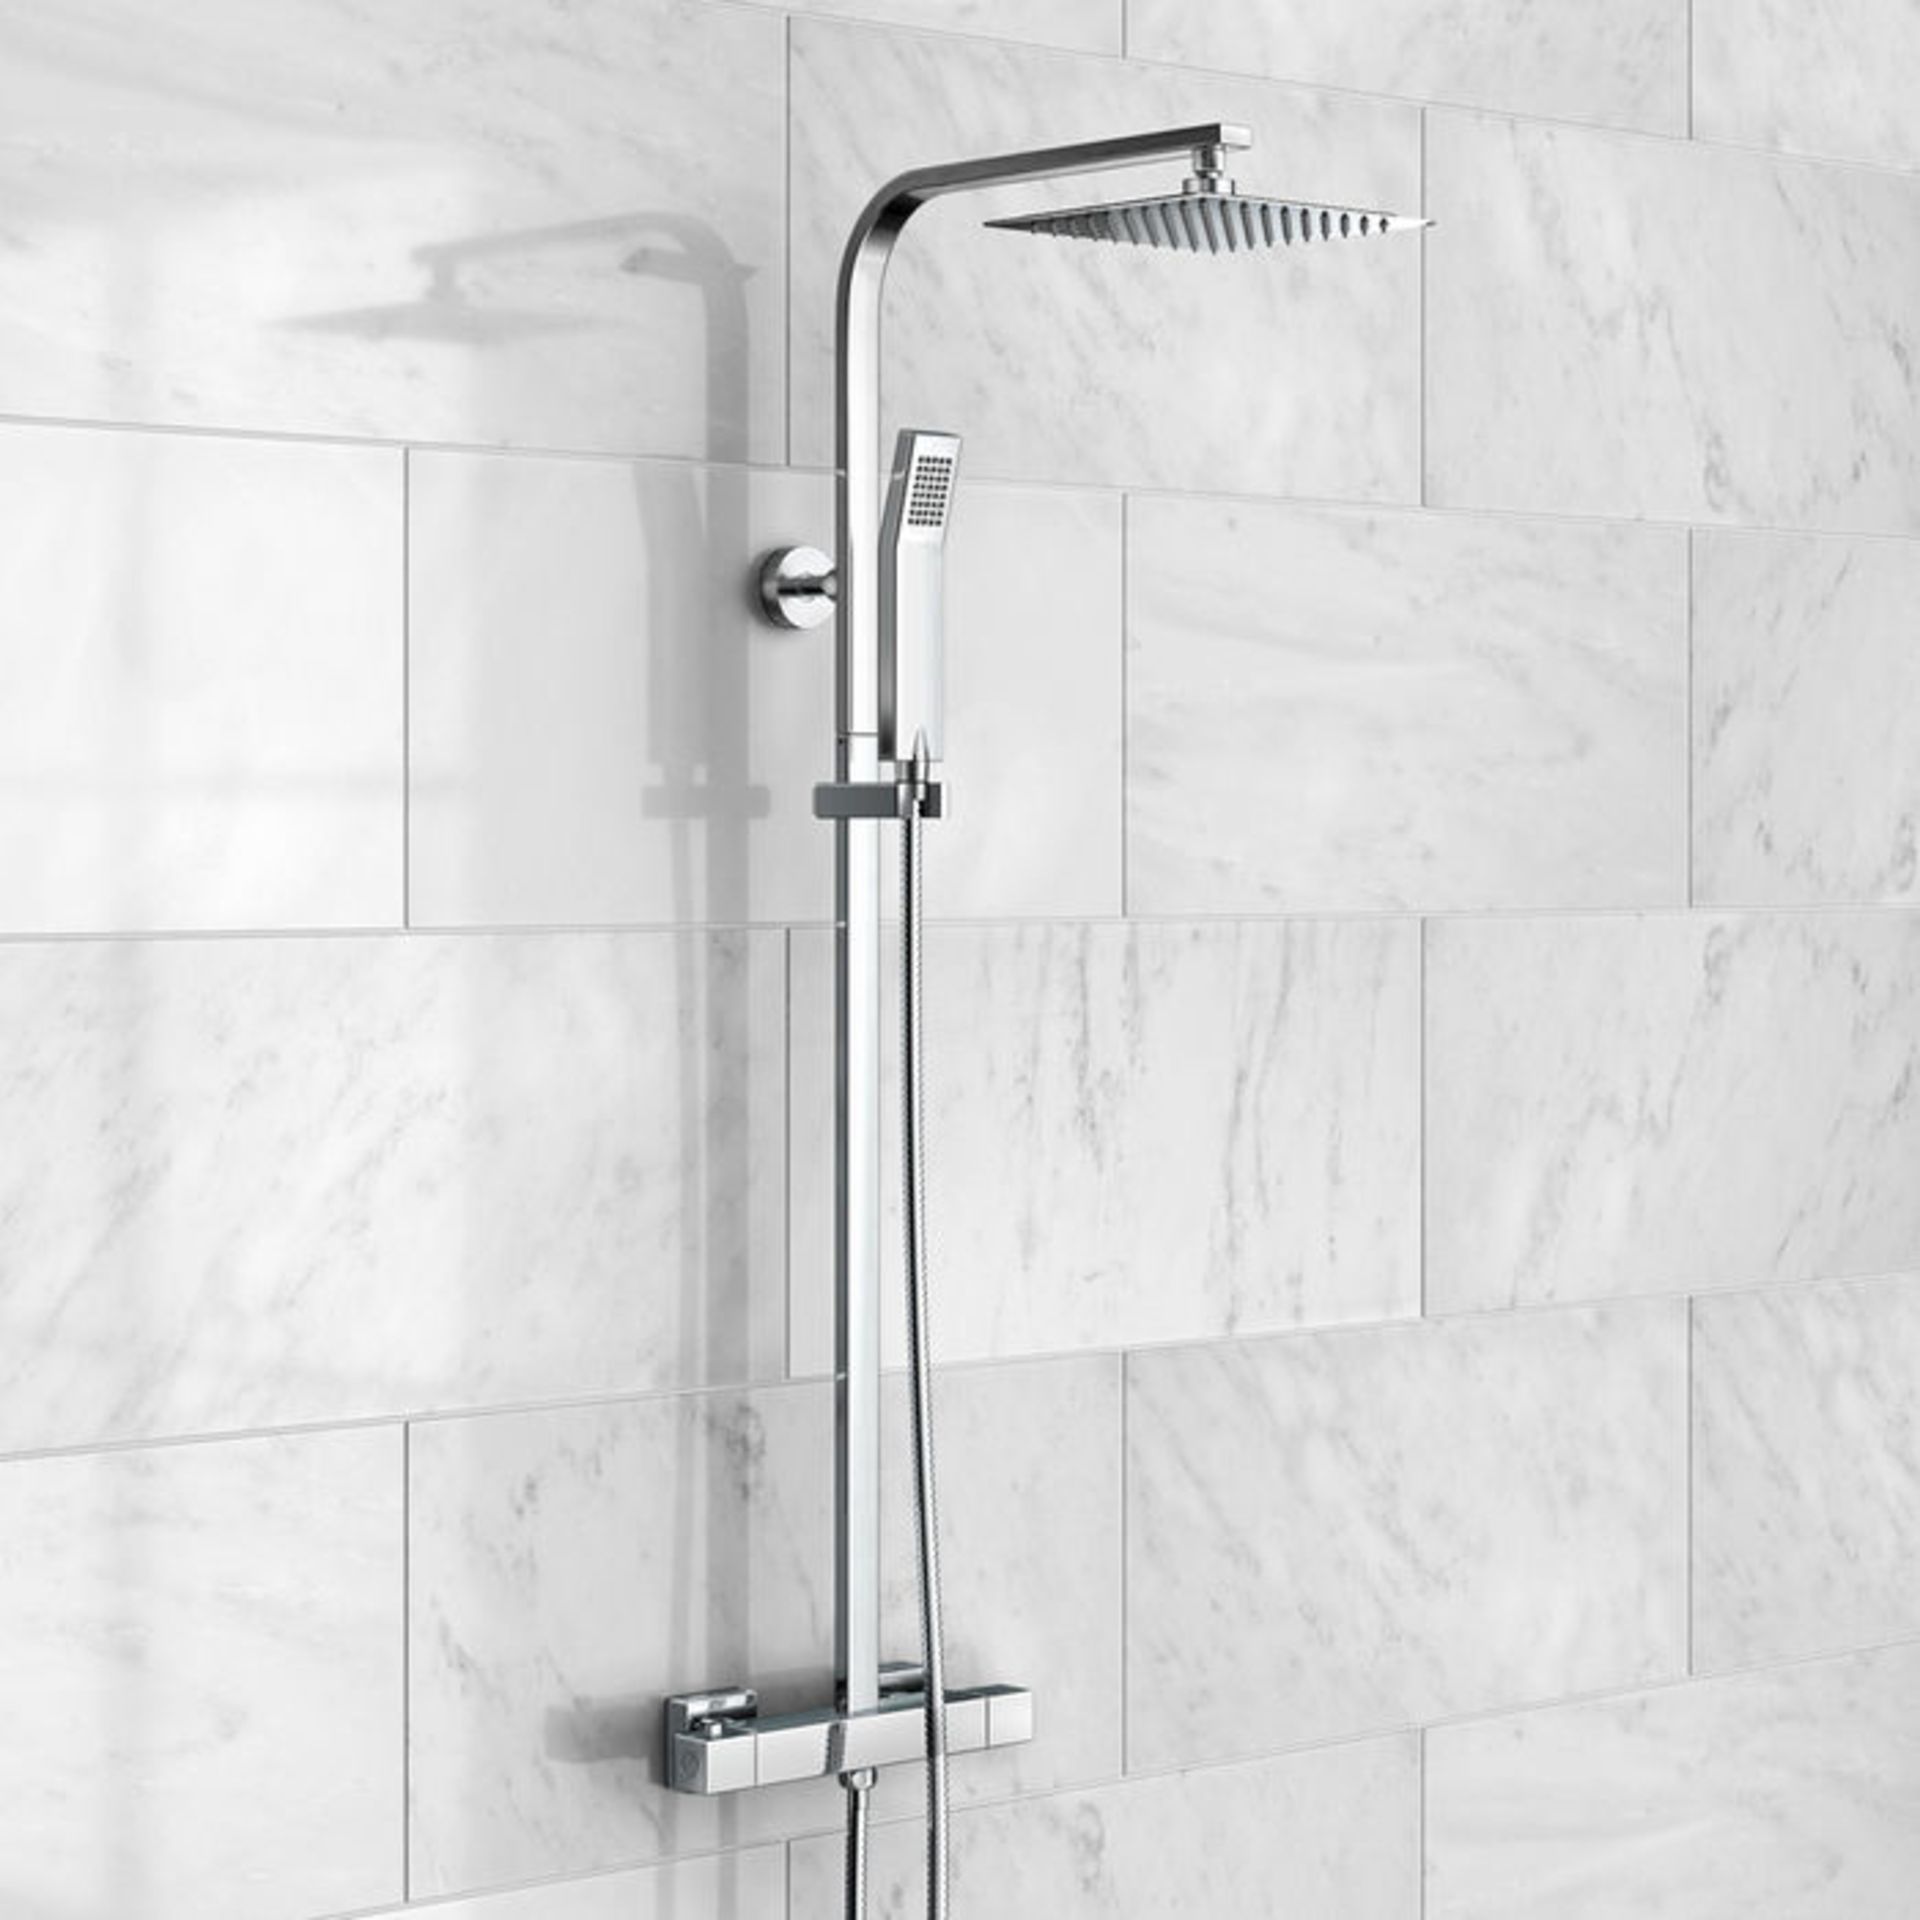 (L40) 200mm Square Head Thermostatic Exposed Shower Kit. Family friendly detachable hand set to suit - Image 2 of 3